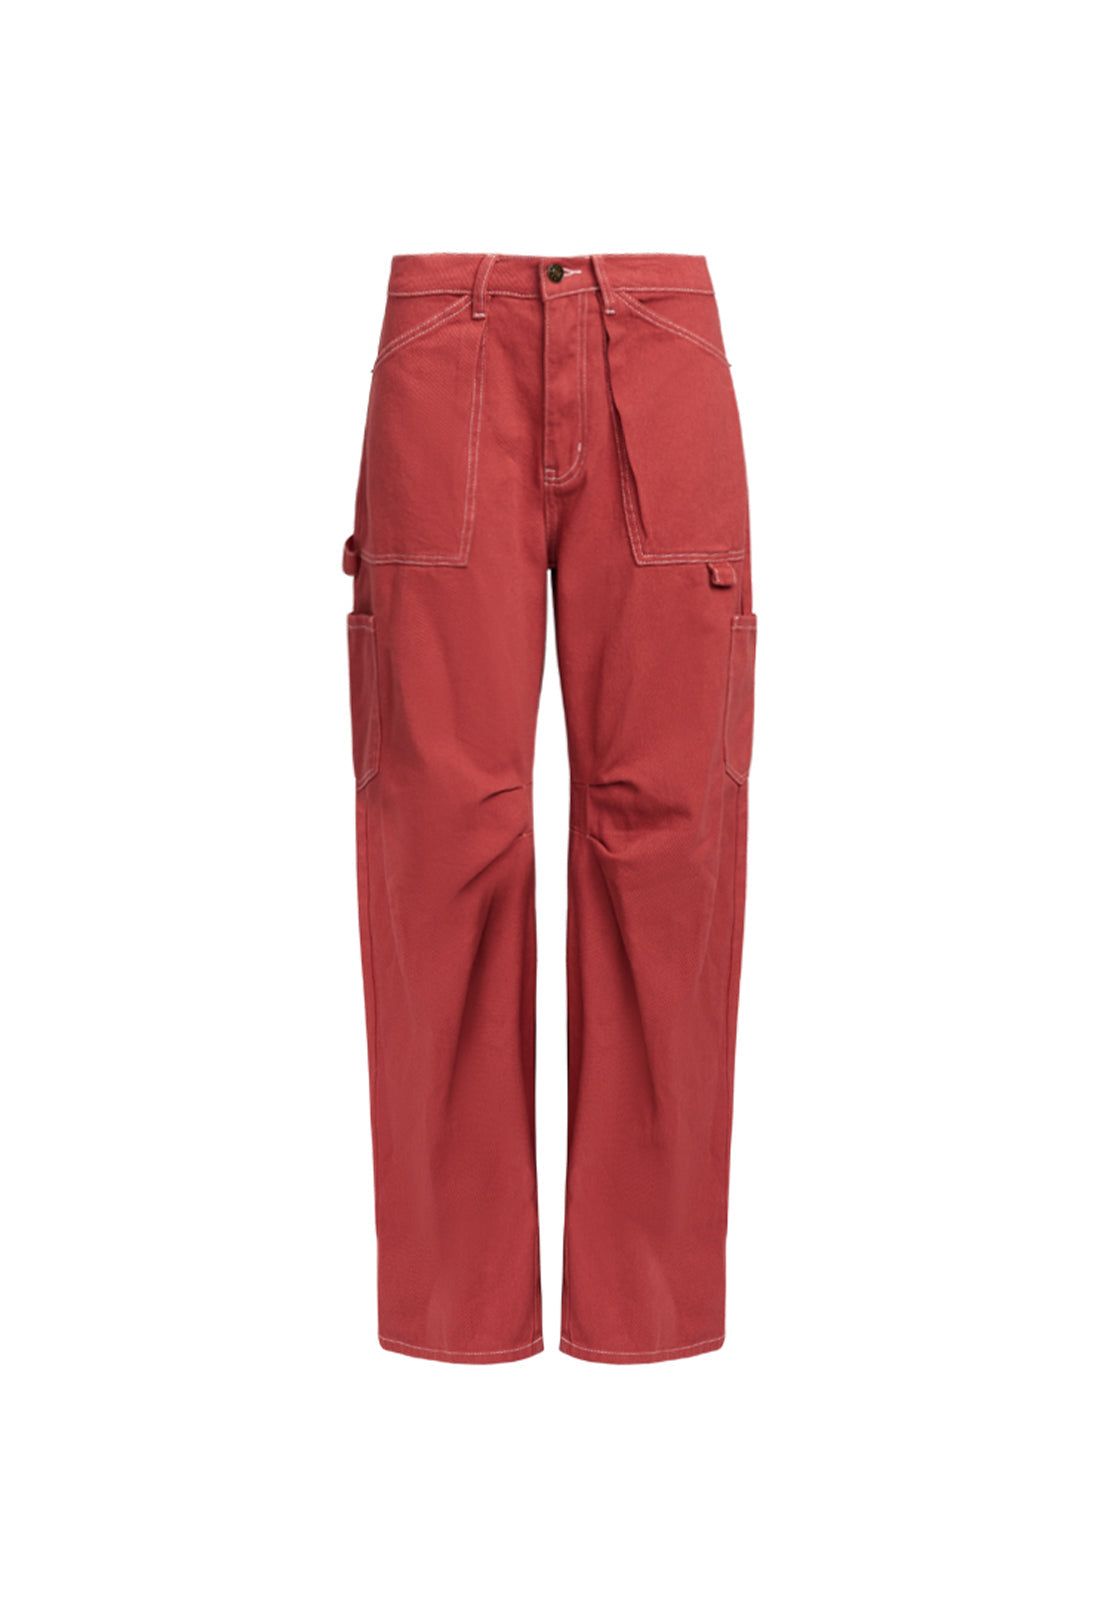 MIAMI VICE PANT - RED